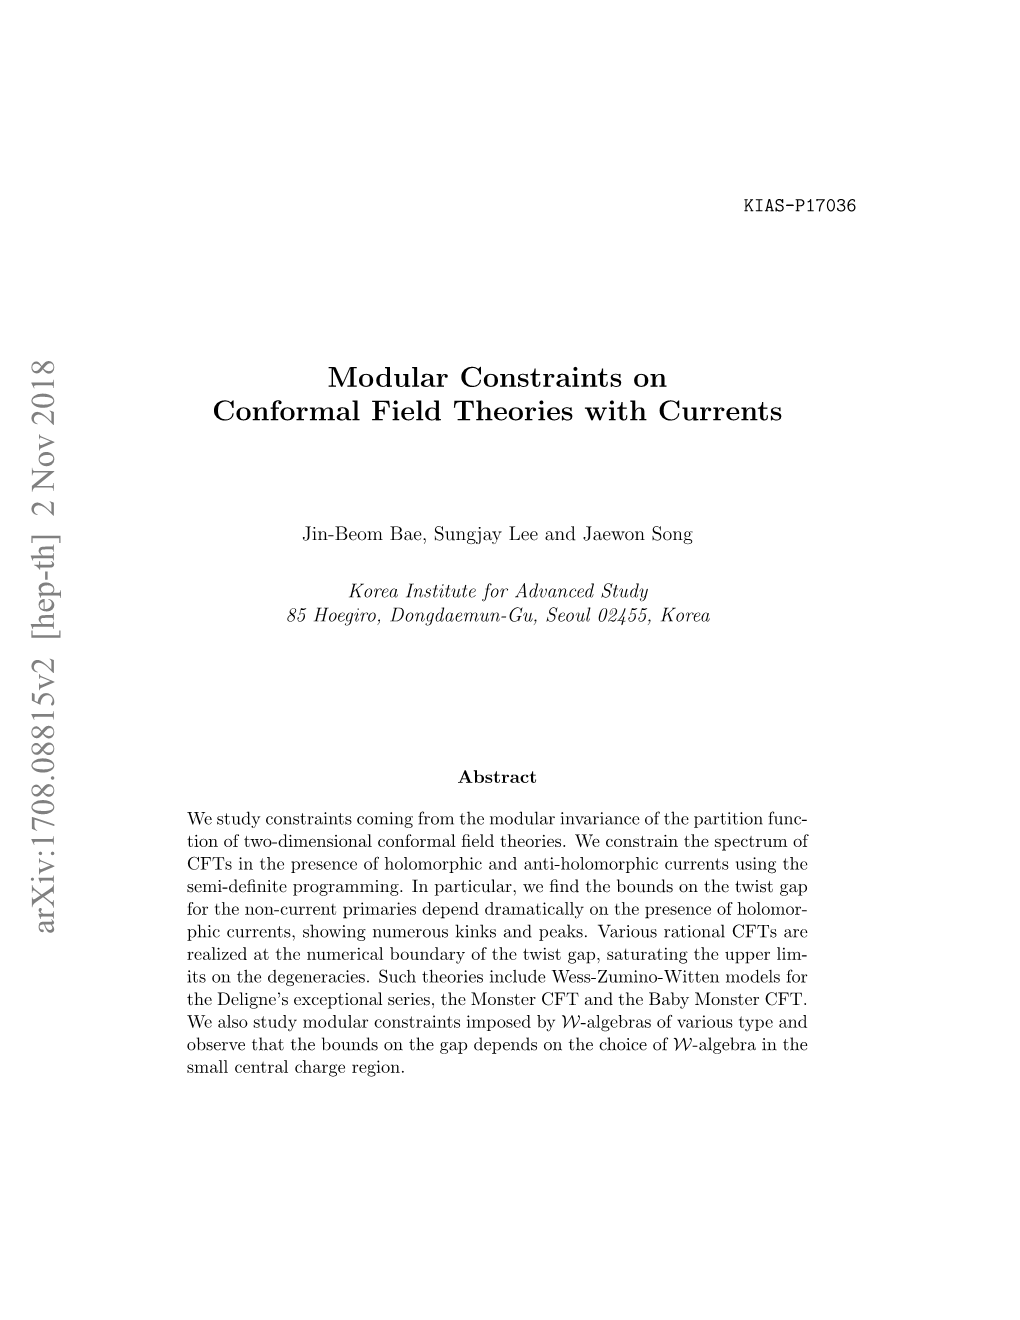 Modular Constraints on Conformal Field Theories with Currents